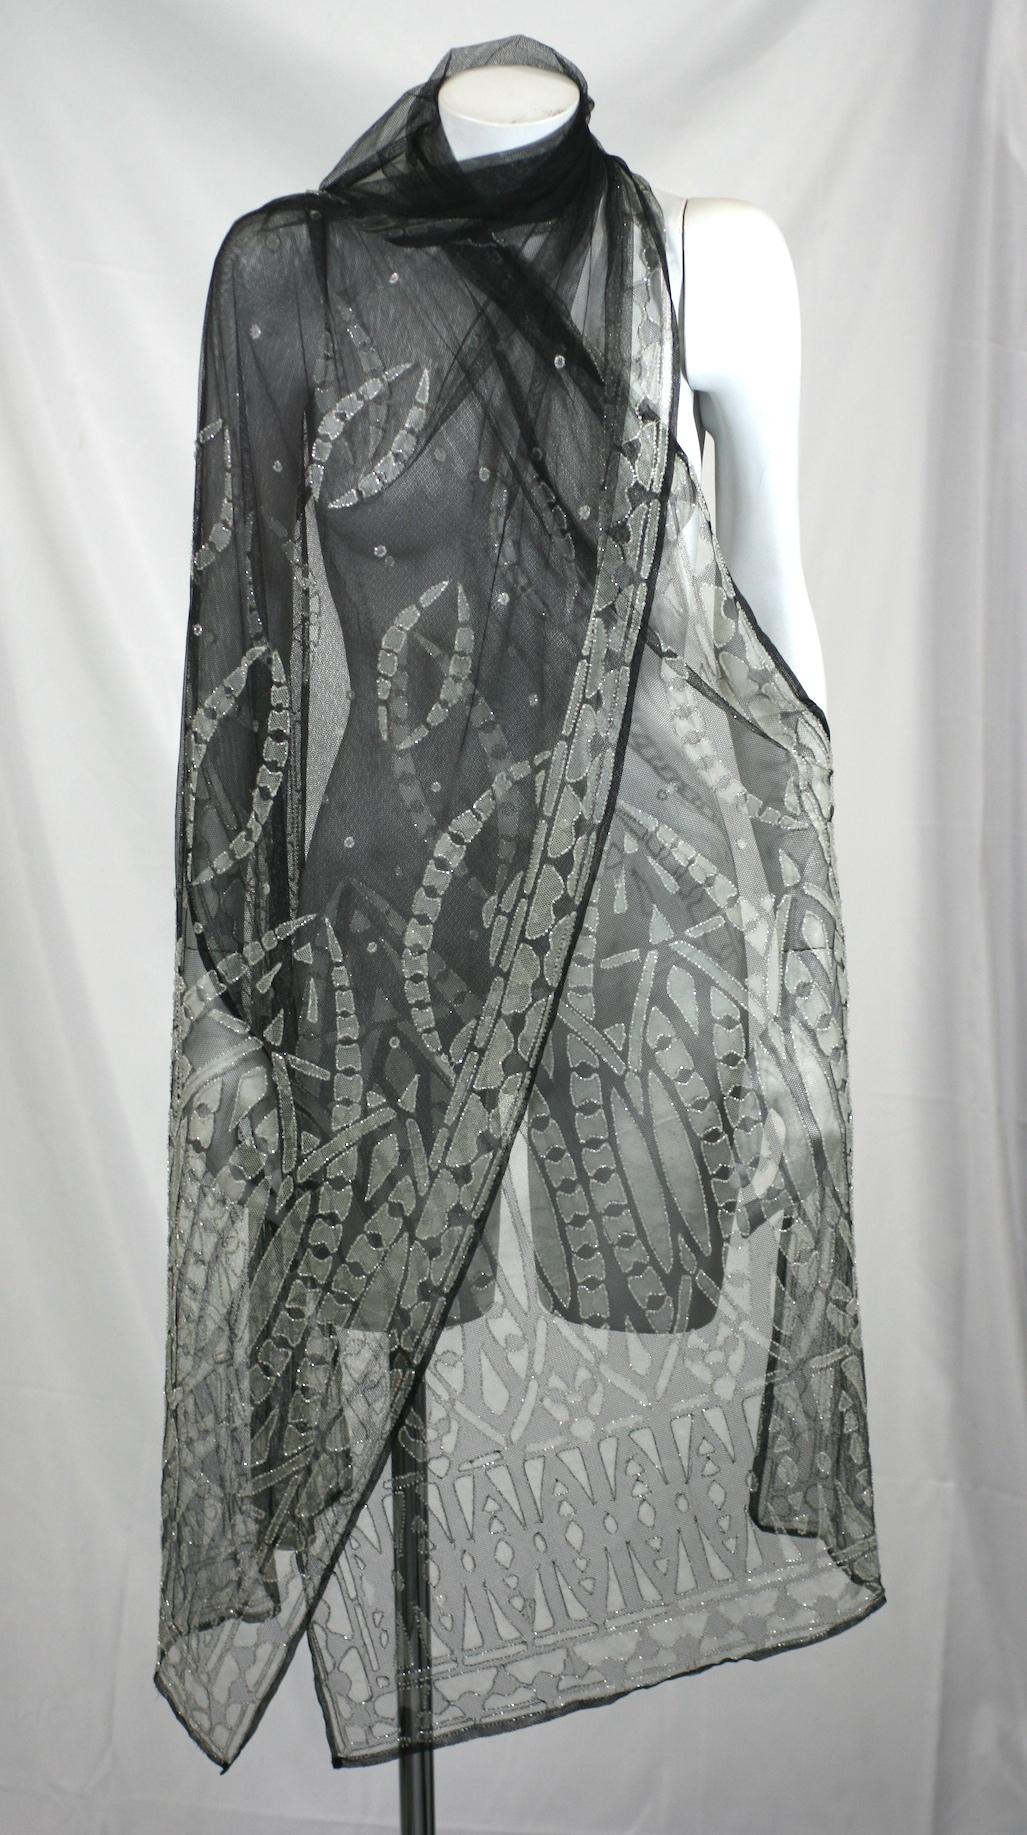 Stunning Art Deco Silk tulle shawl in black and ivory with frosted decorative over beading throughout. Wonderful patterning with black tulle in center and beaded areas predominantly on edges and hems. The ivory patterns are hand outlined in